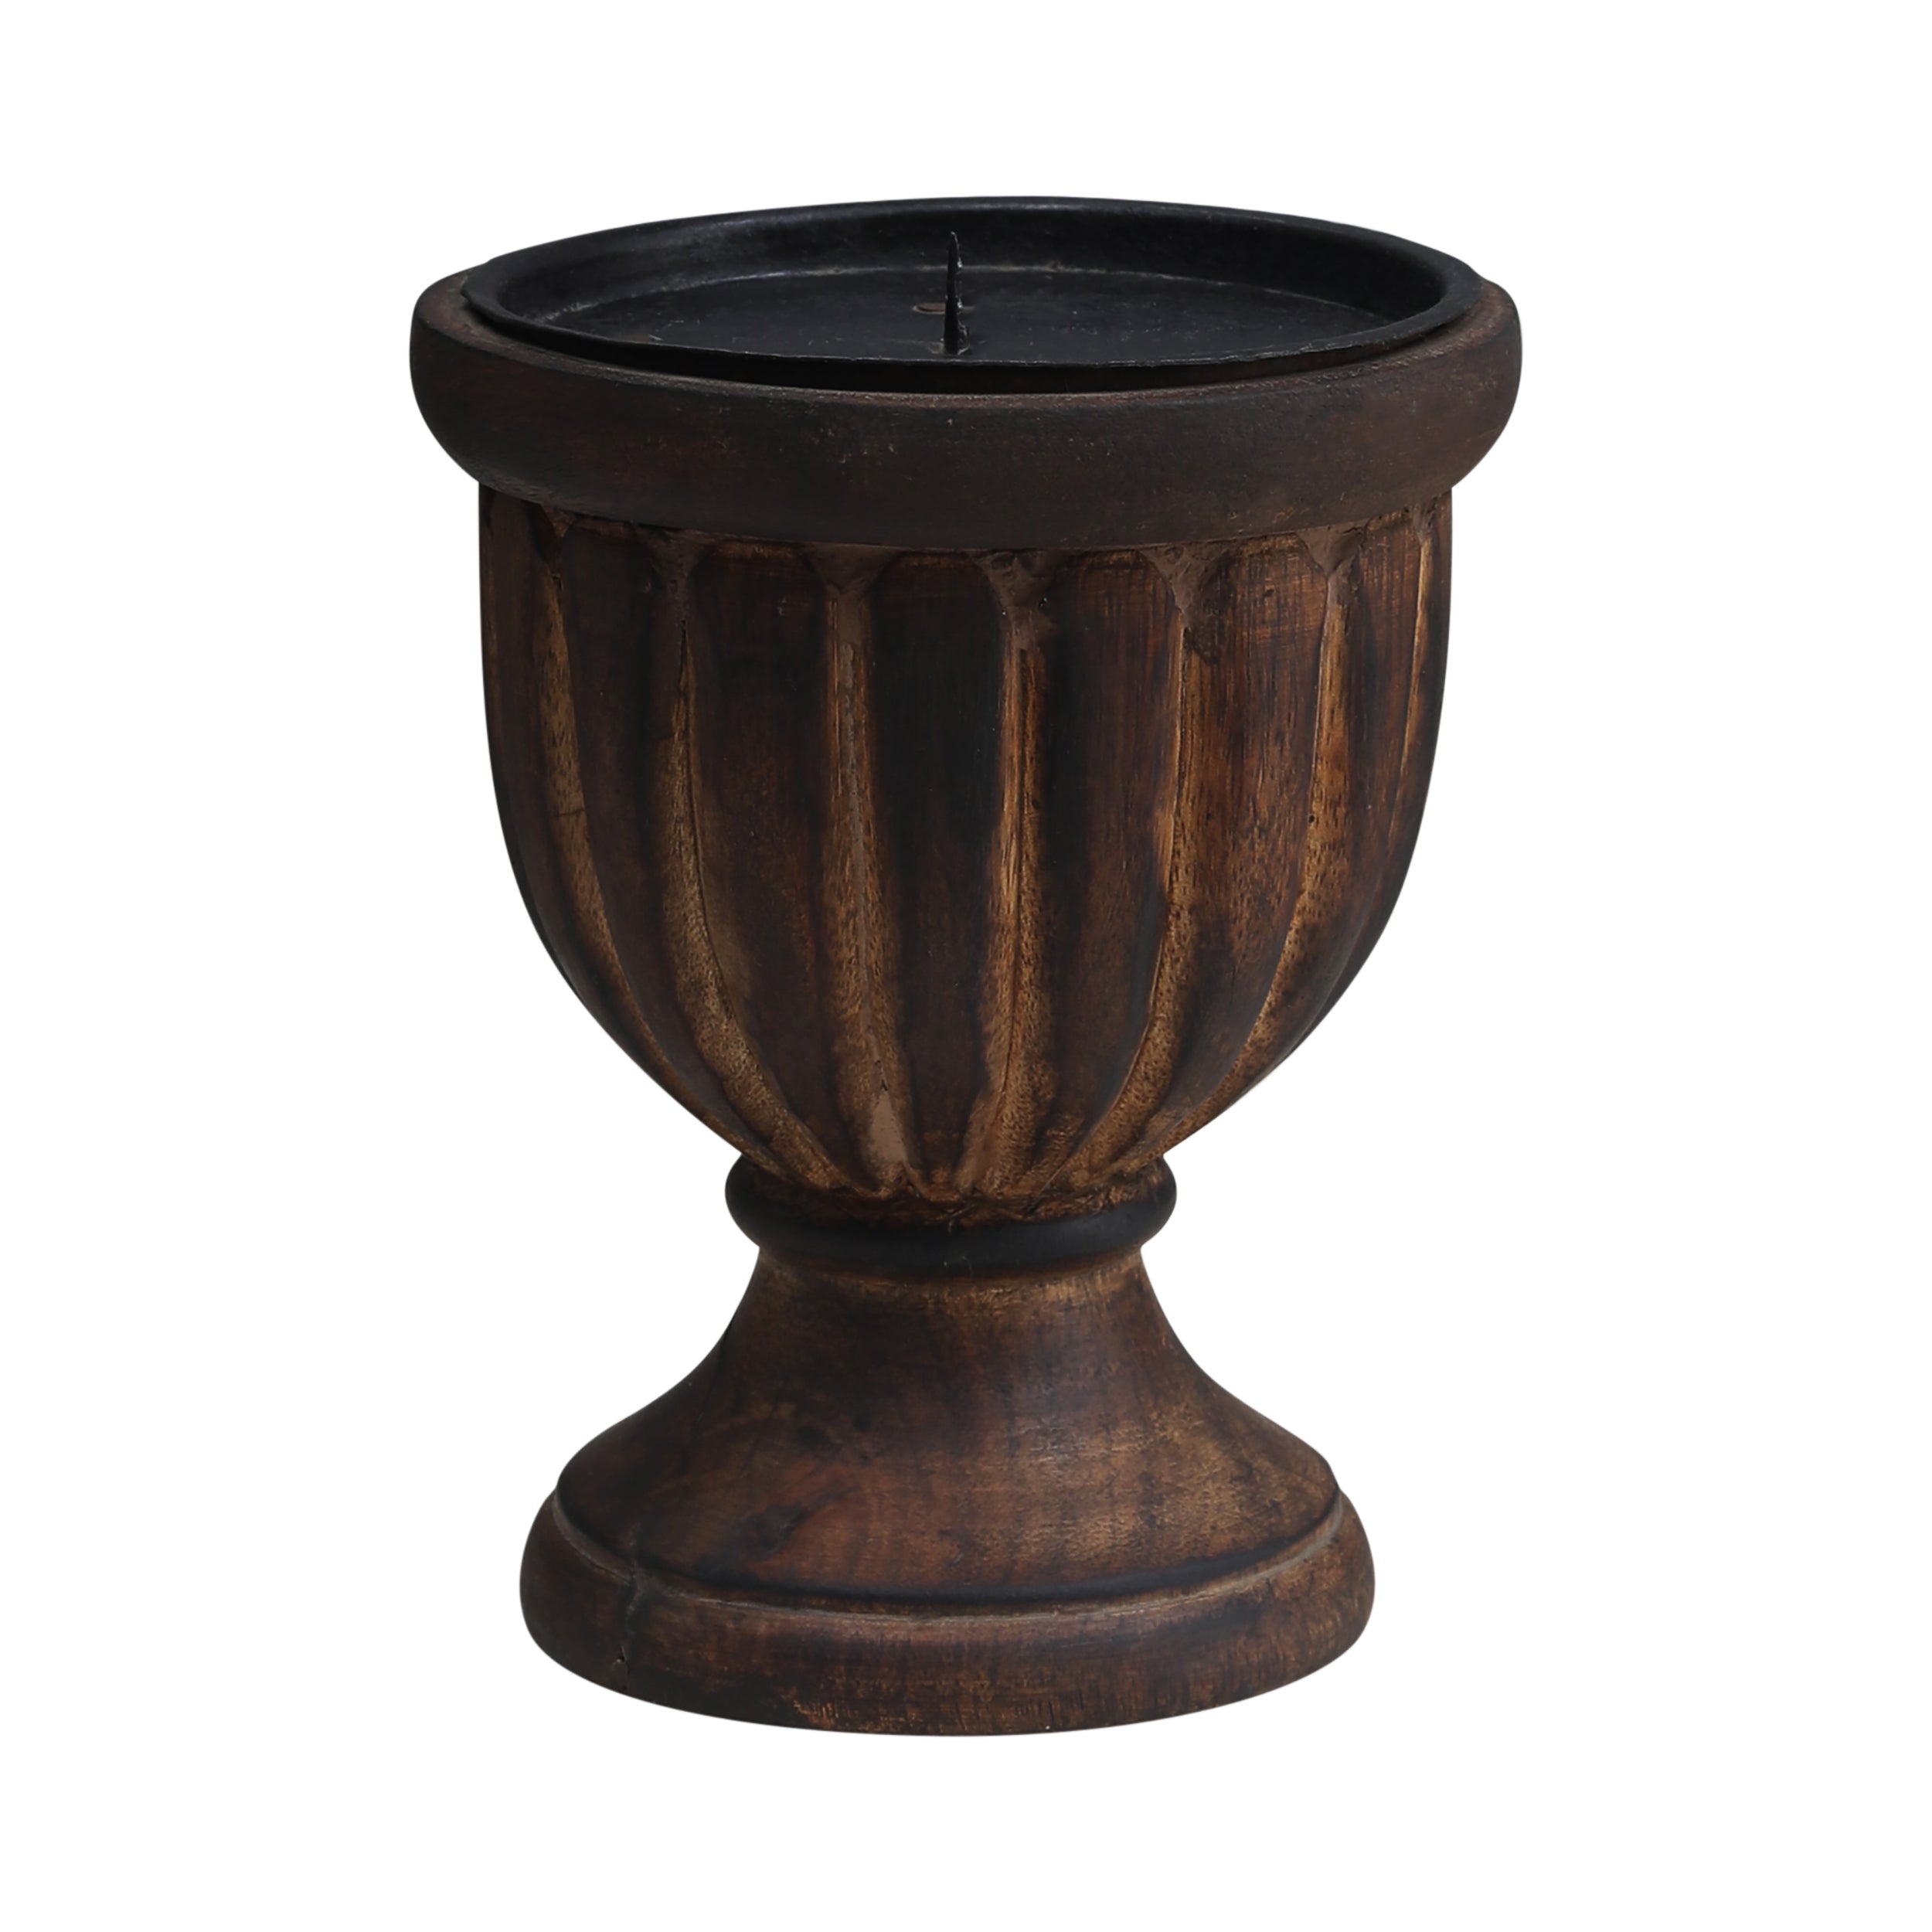 The Chalice - Handcarved Candle Stand (Single)